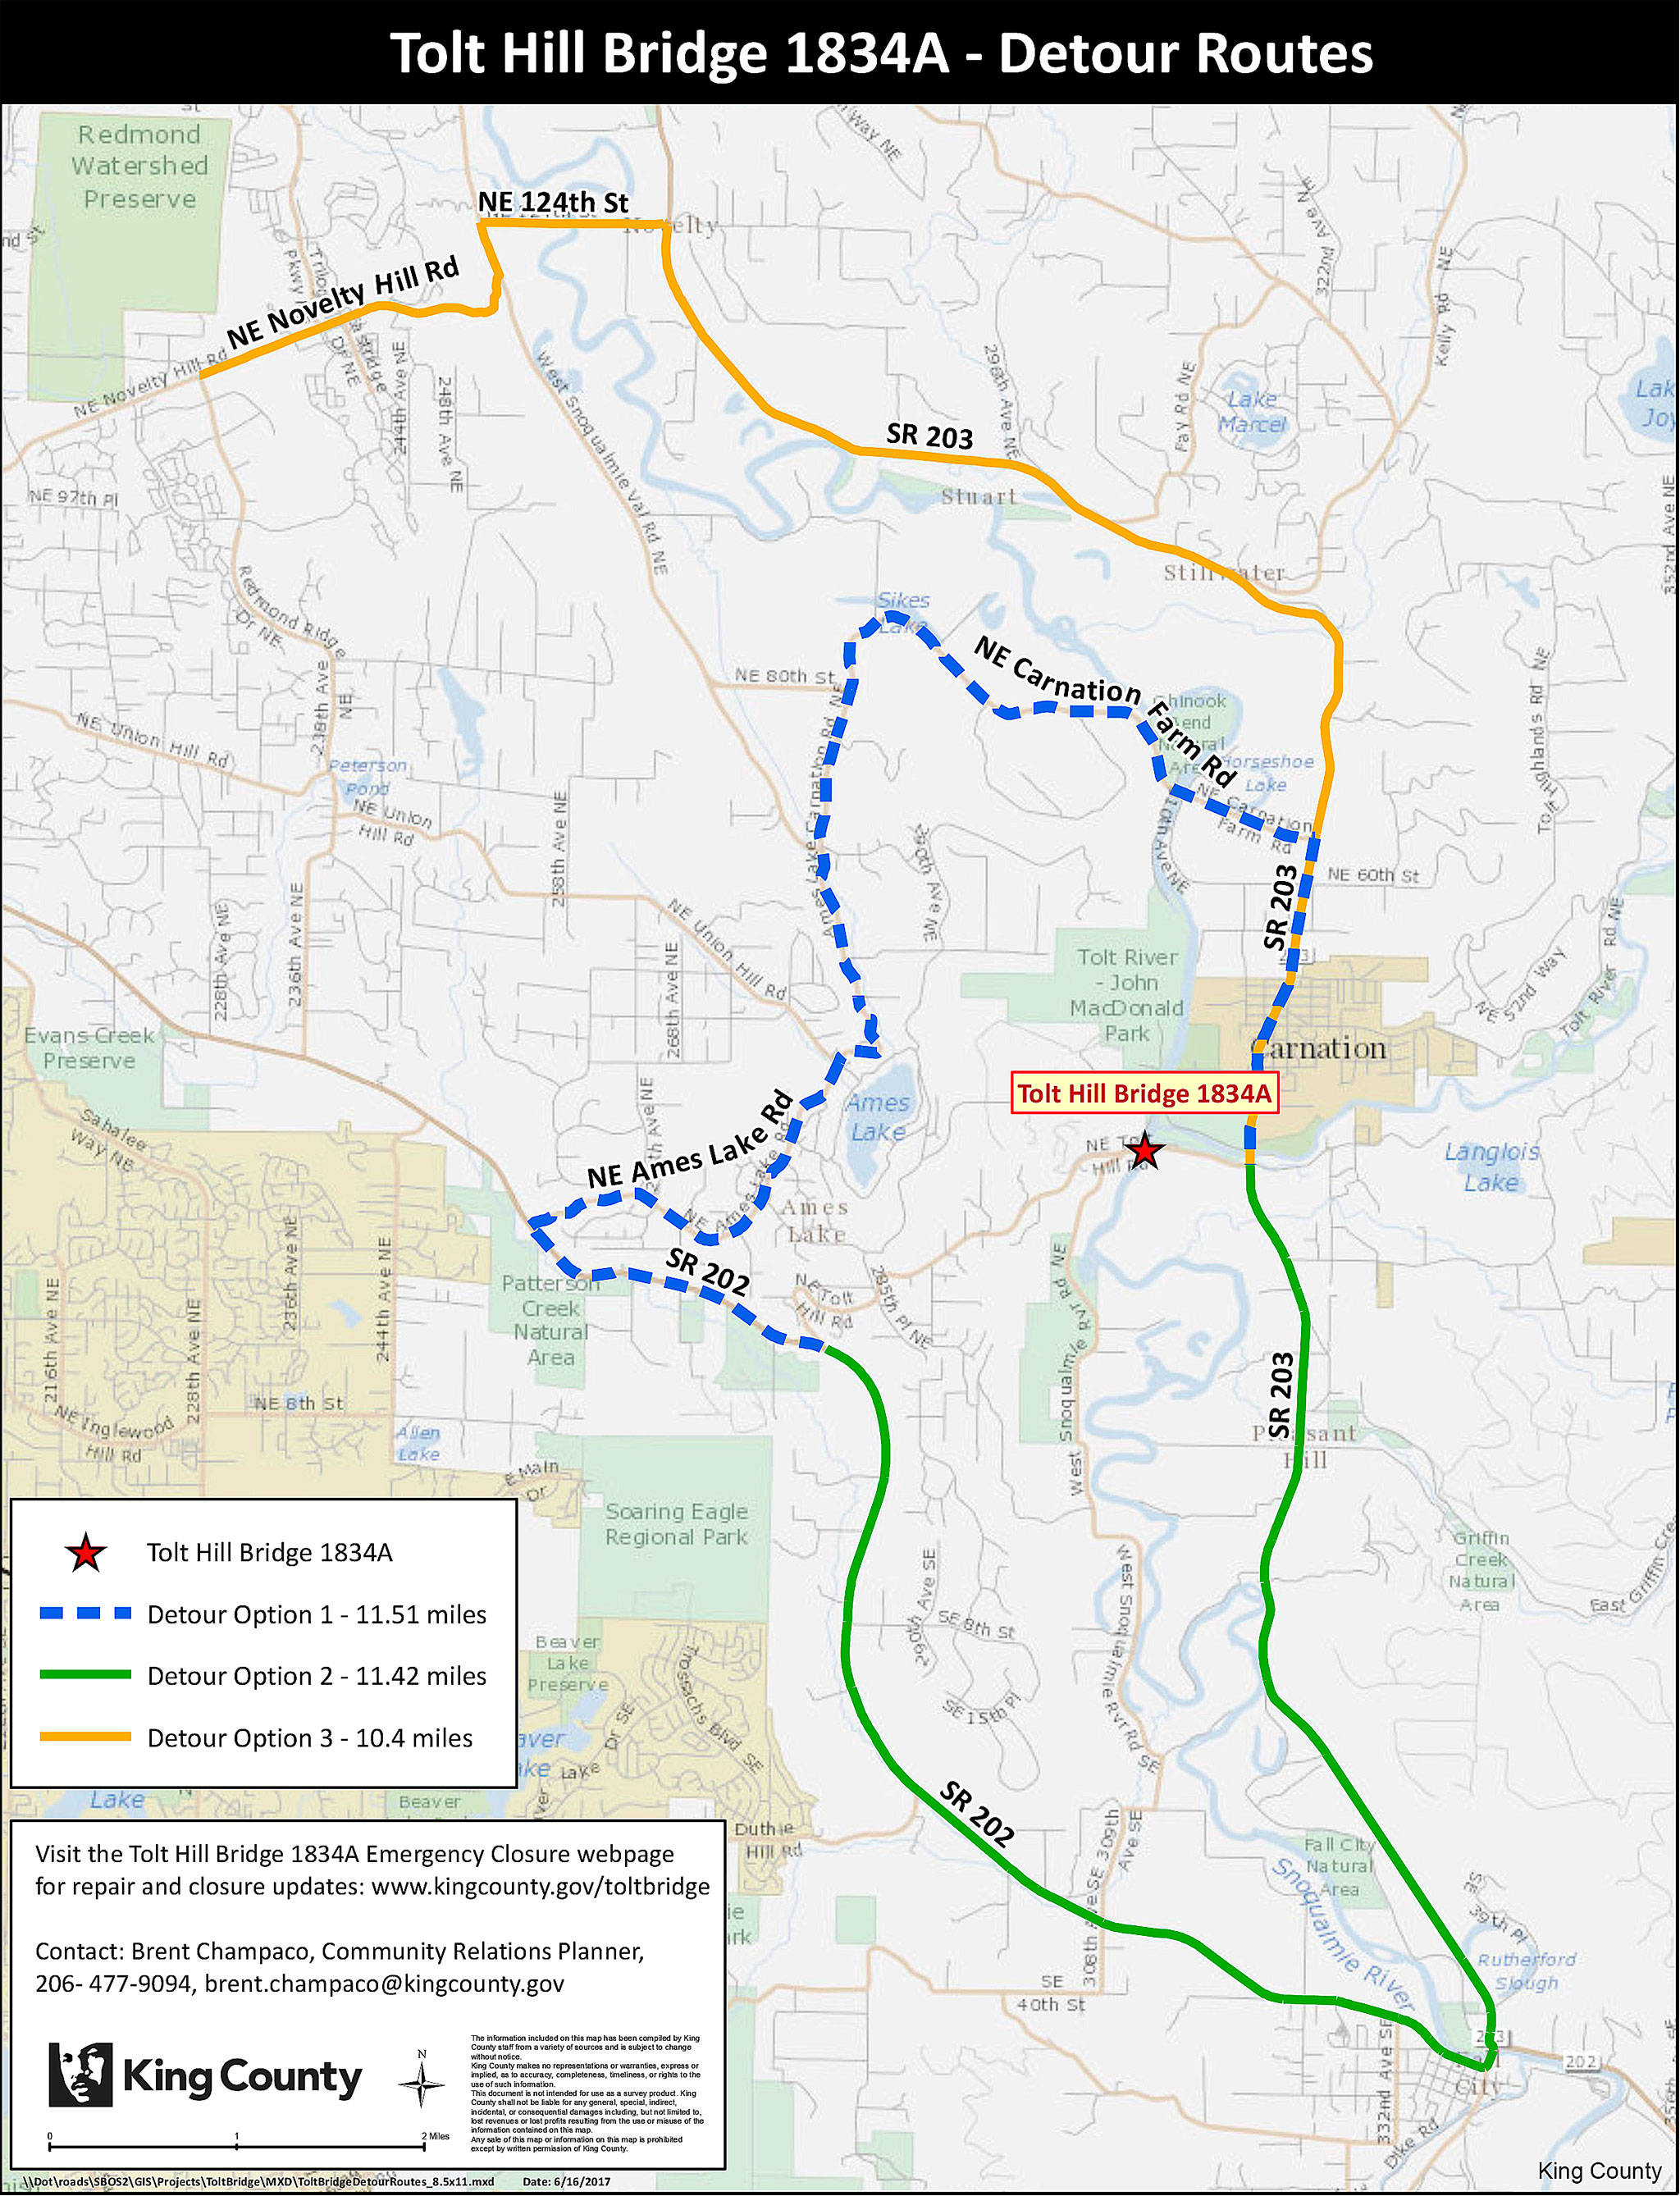 Courtesy Image                                King County has posted the following detour options for the indefinite closure of the Tolt Hill Bridge.